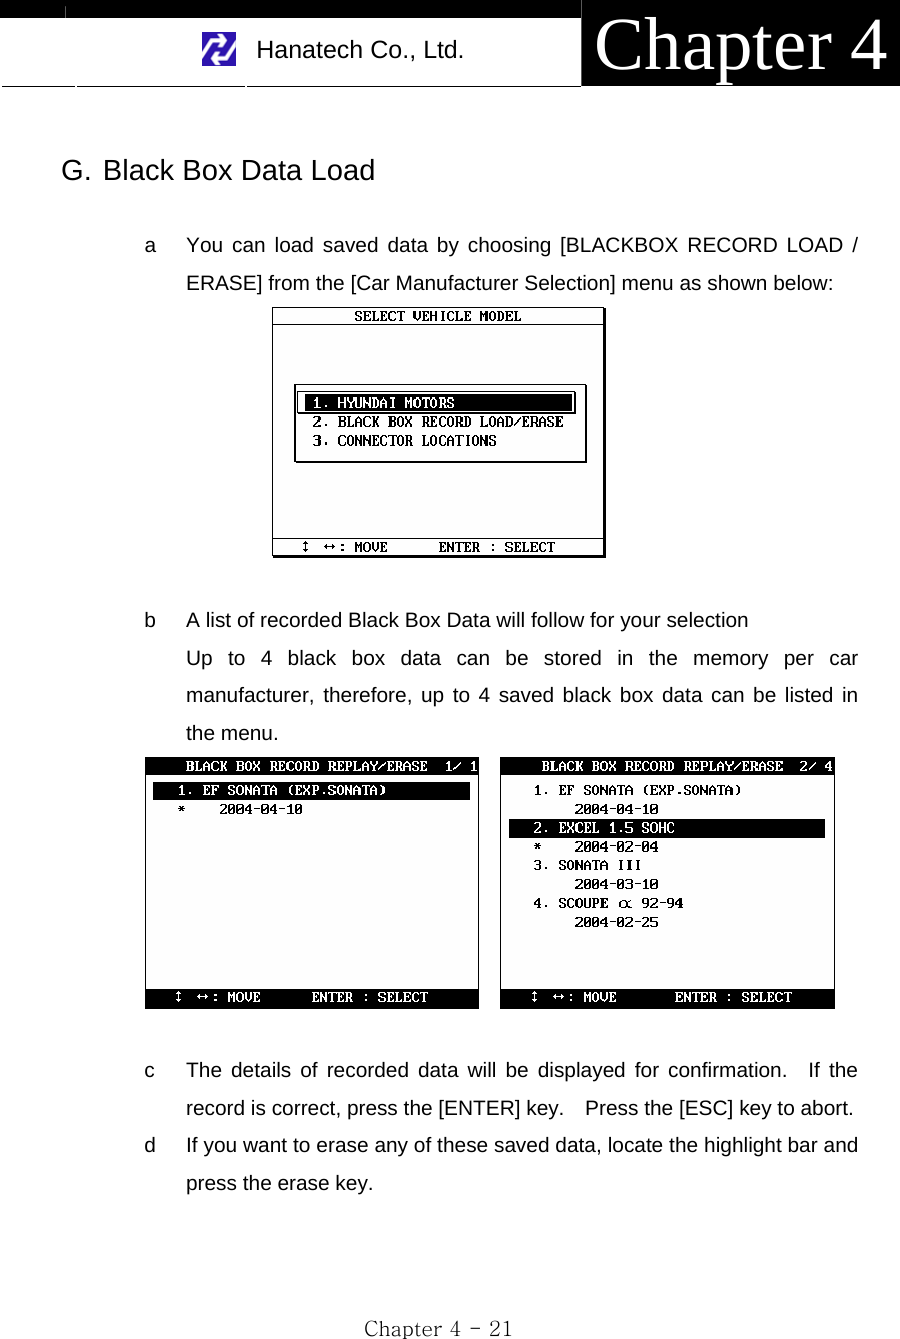     Hanatech Co., Ltd.  Chapter 4 Chapter 4 - 21  G. Black Box Data Load  a  You can load saved data by choosing [BLACKBOX RECORD LOAD / ERASE] from the [Car Manufacturer Selection] menu as shown below:   b  A list of recorded Black Box Data will follow for your selection Up to 4 black box data can be stored in the memory per car manufacturer, therefore, up to 4 saved black box data can be listed in the menu.      c  The details of recorded data will be displayed for confirmation.  If the record is correct, press the [ENTER] key.    Press the [ESC] key to abort. d  If you want to erase any of these saved data, locate the highlight bar and press the erase key.   